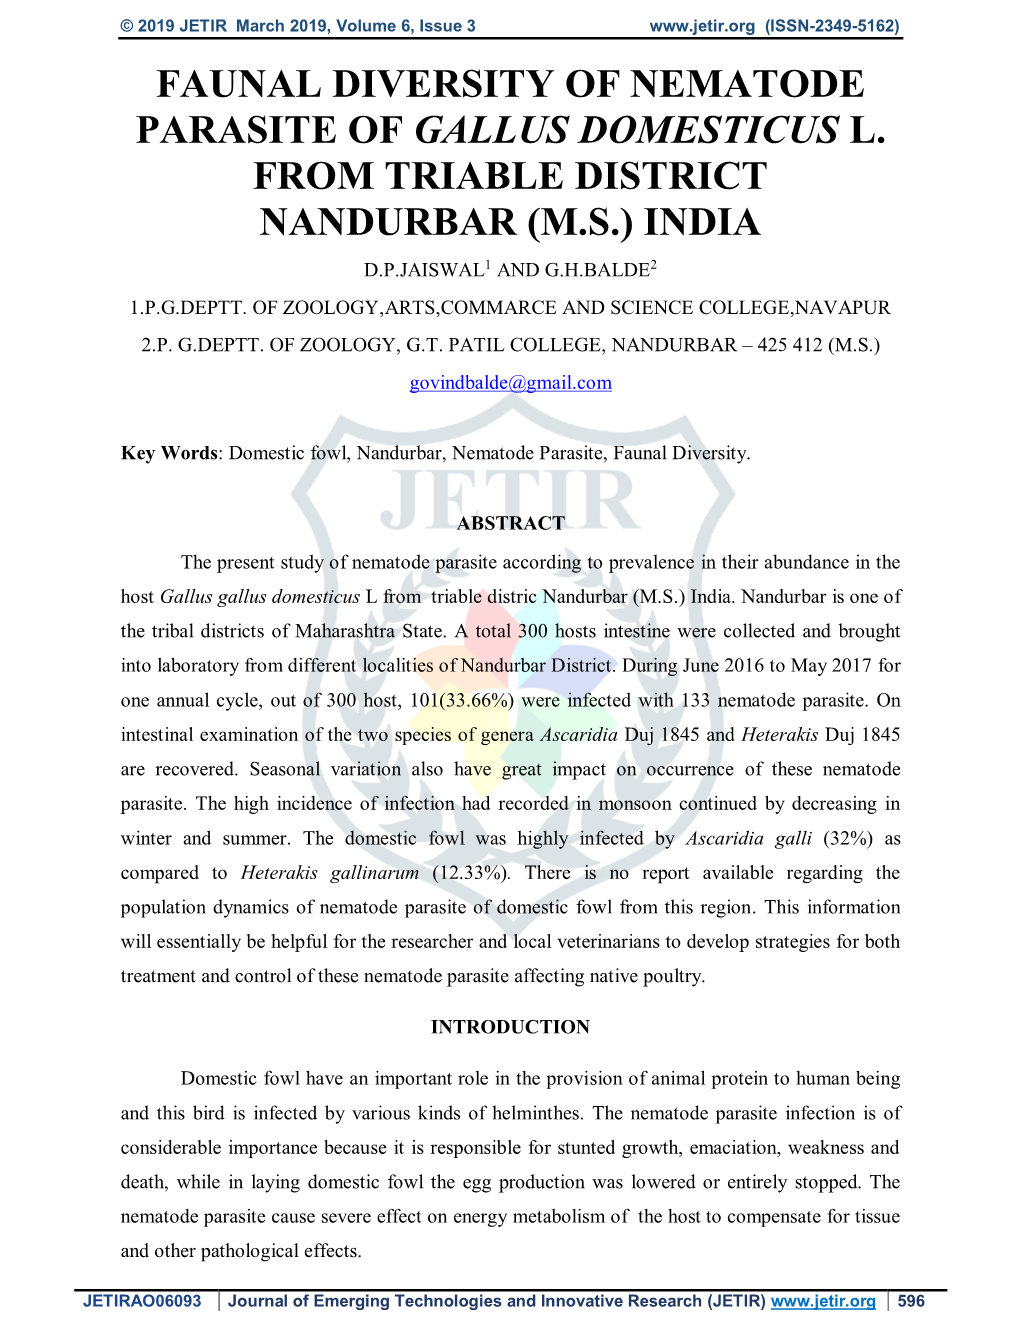 Faunal Diversity of Nematode Parasite of Gallus Domesticus L. from Triable District Nandurbar (M.S.) India D.P.Jaiswal1 and G.H.Balde2 1.P.G.Deptt